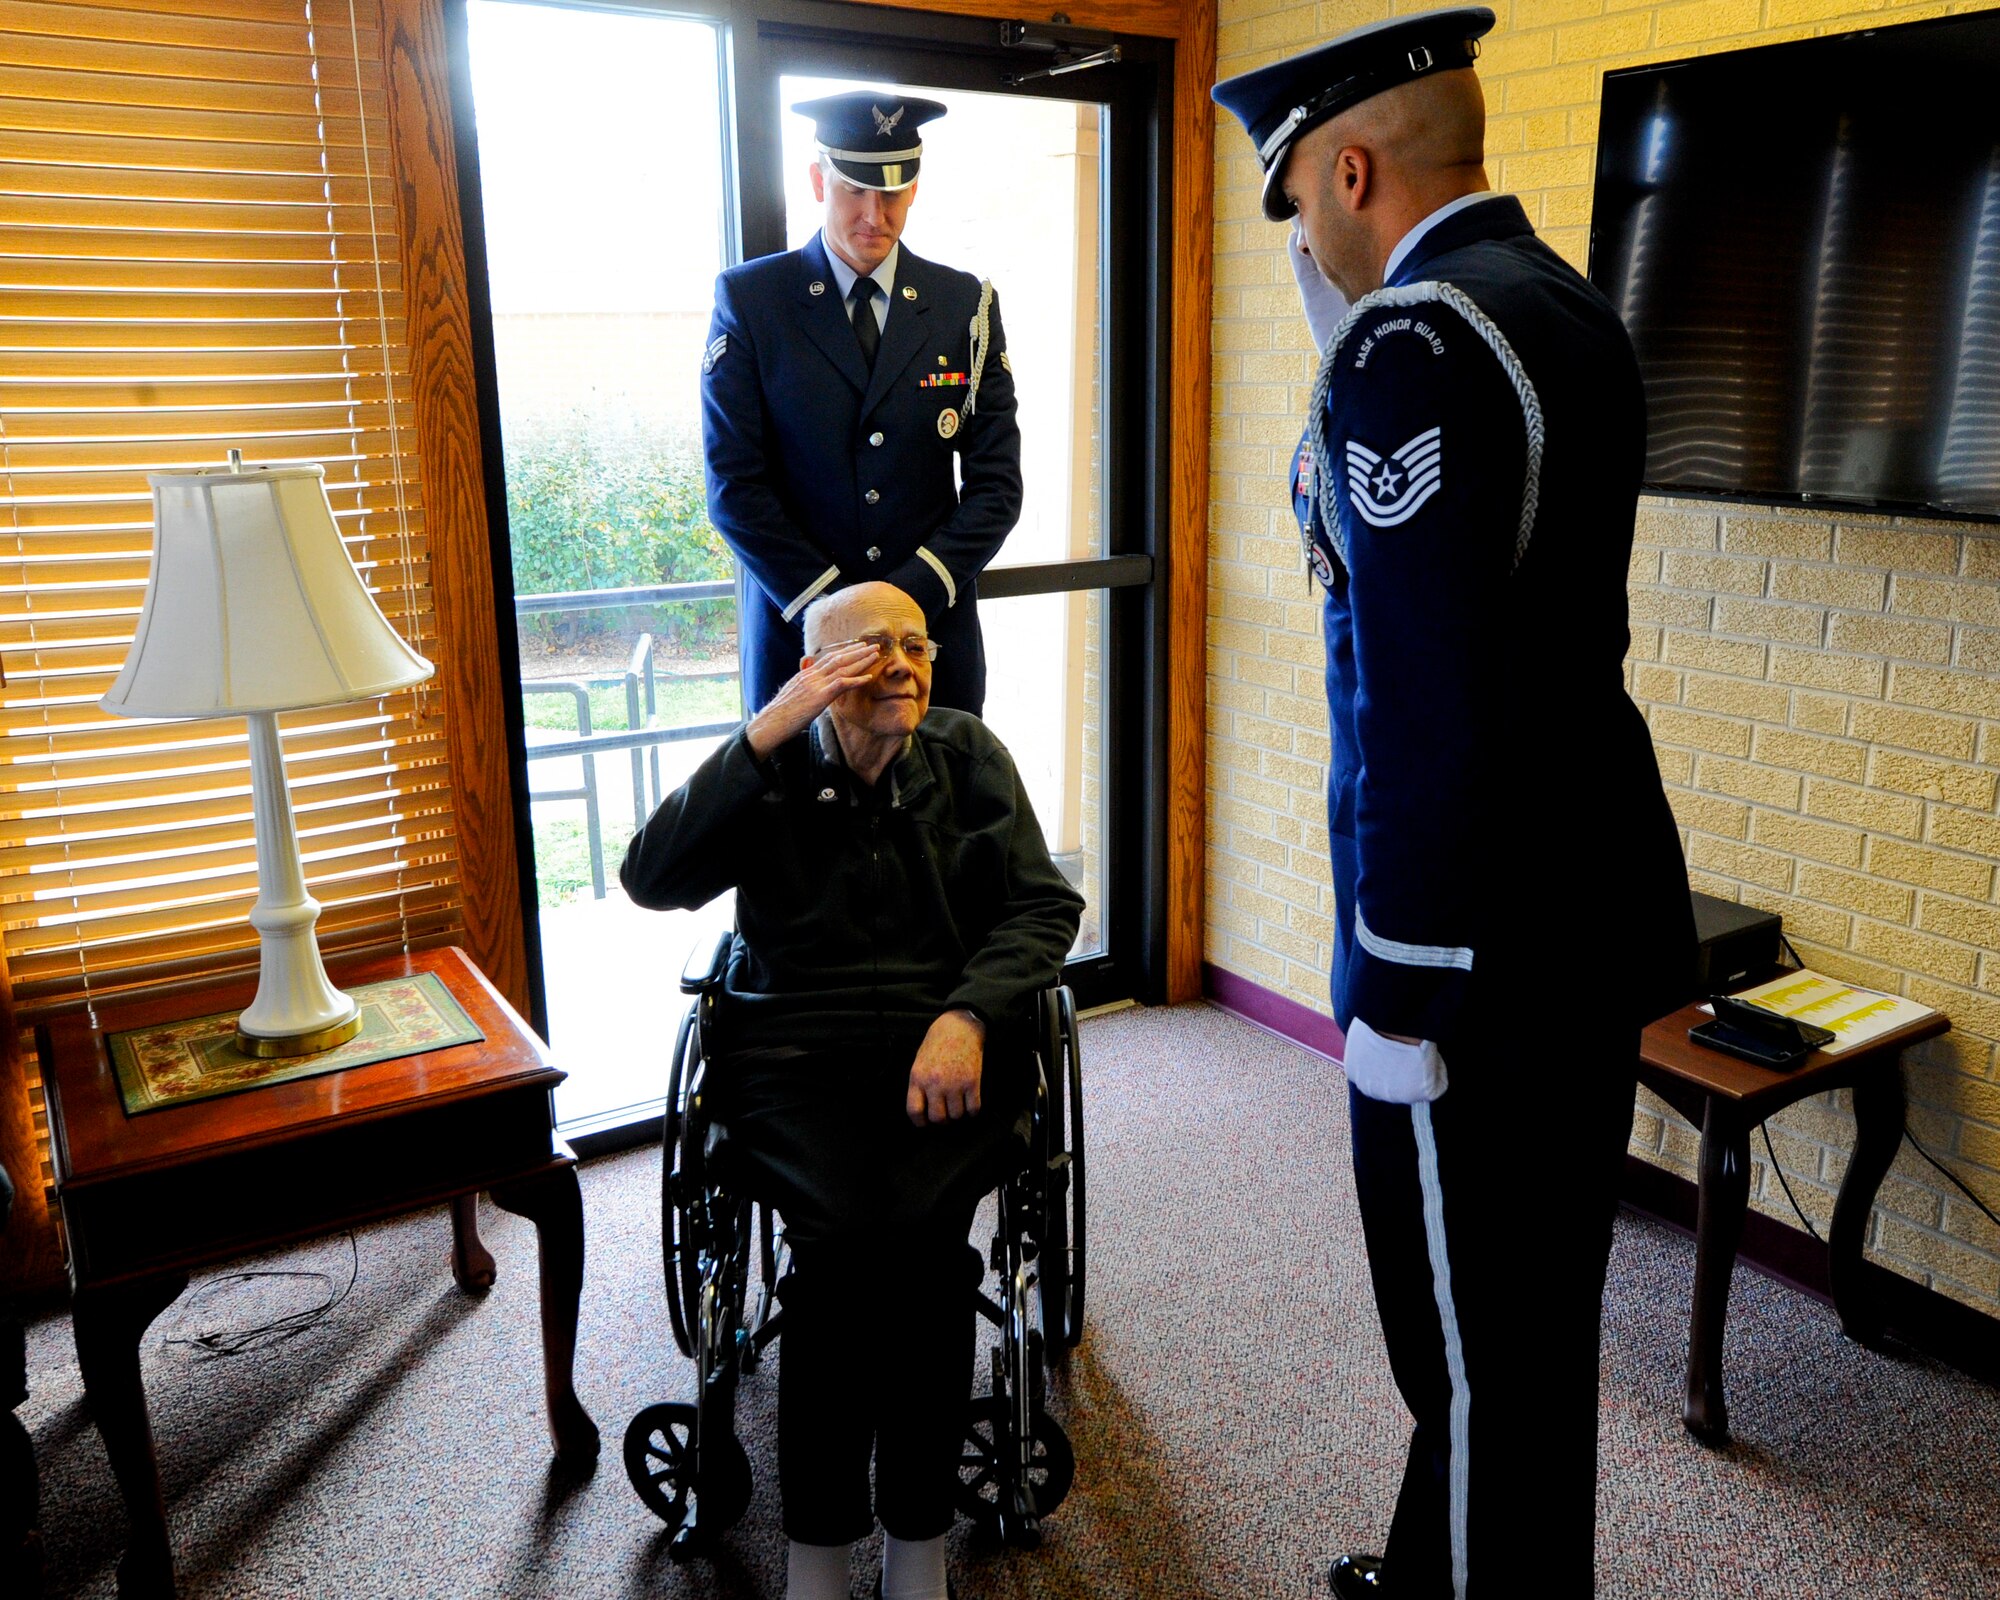 Roy Mullinax, a former Airman, returns a salute to Tech. Sgt. Terrance Williams, 22nd Air Refueling Wing Honor Guard NCO in charge, after being presented with a veteran’s pin during a recognition ceremony, Dec. 8, 2015, in Newton, Kan. Members of the 22nd ARW Honor Guard recognized Mullinax for his years of service during a special ceremony at the request of his family. (U.S. Air Force photo/Senior Airman Victor J. Caputo)